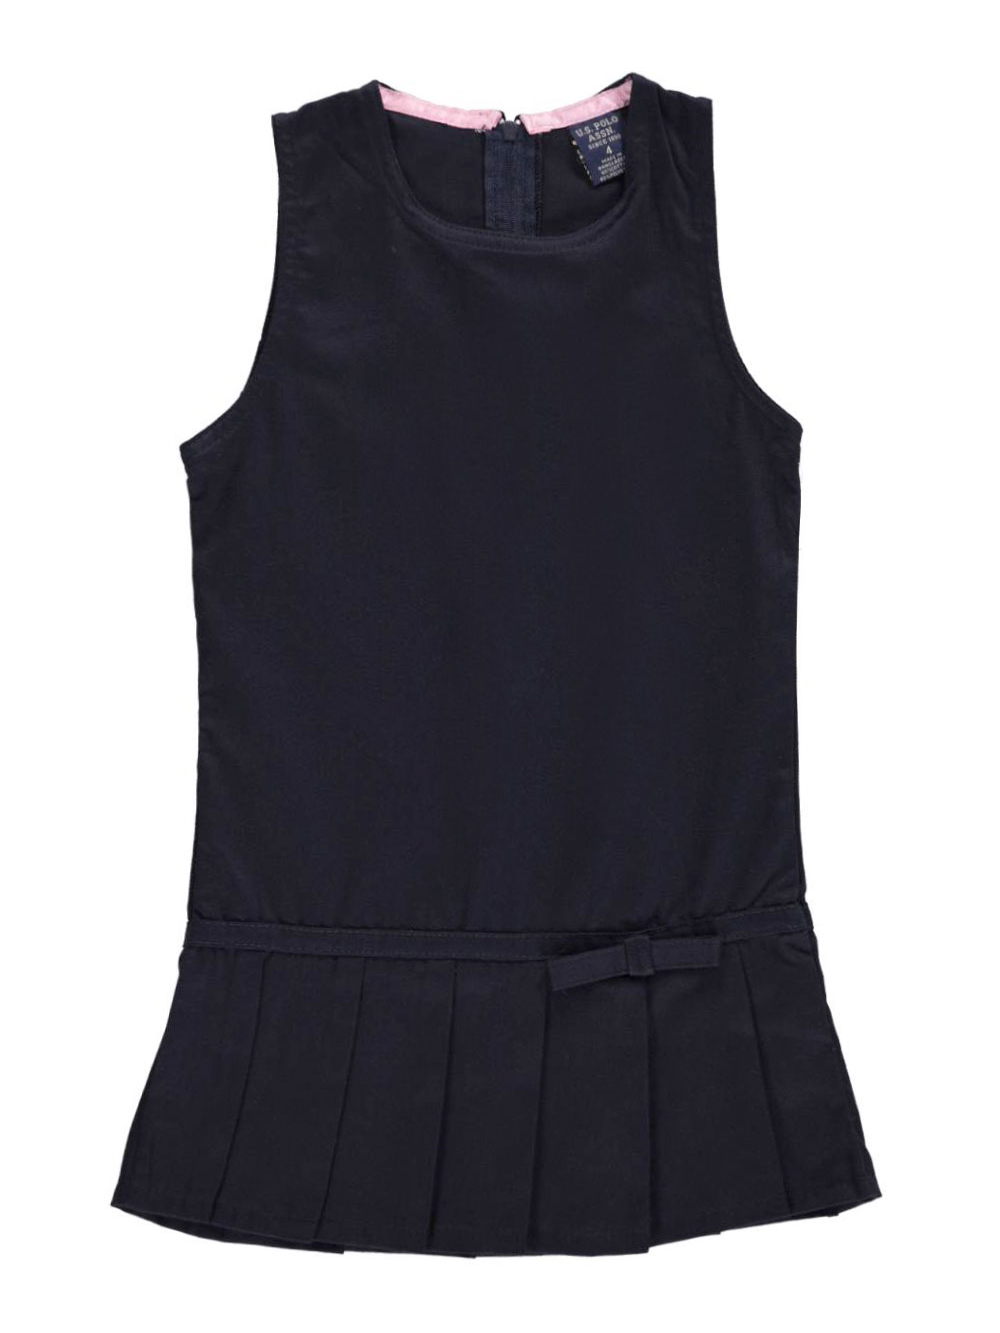 Girls School Uniform Jumpers Sizes 2 - 6X from Cookie's Kids